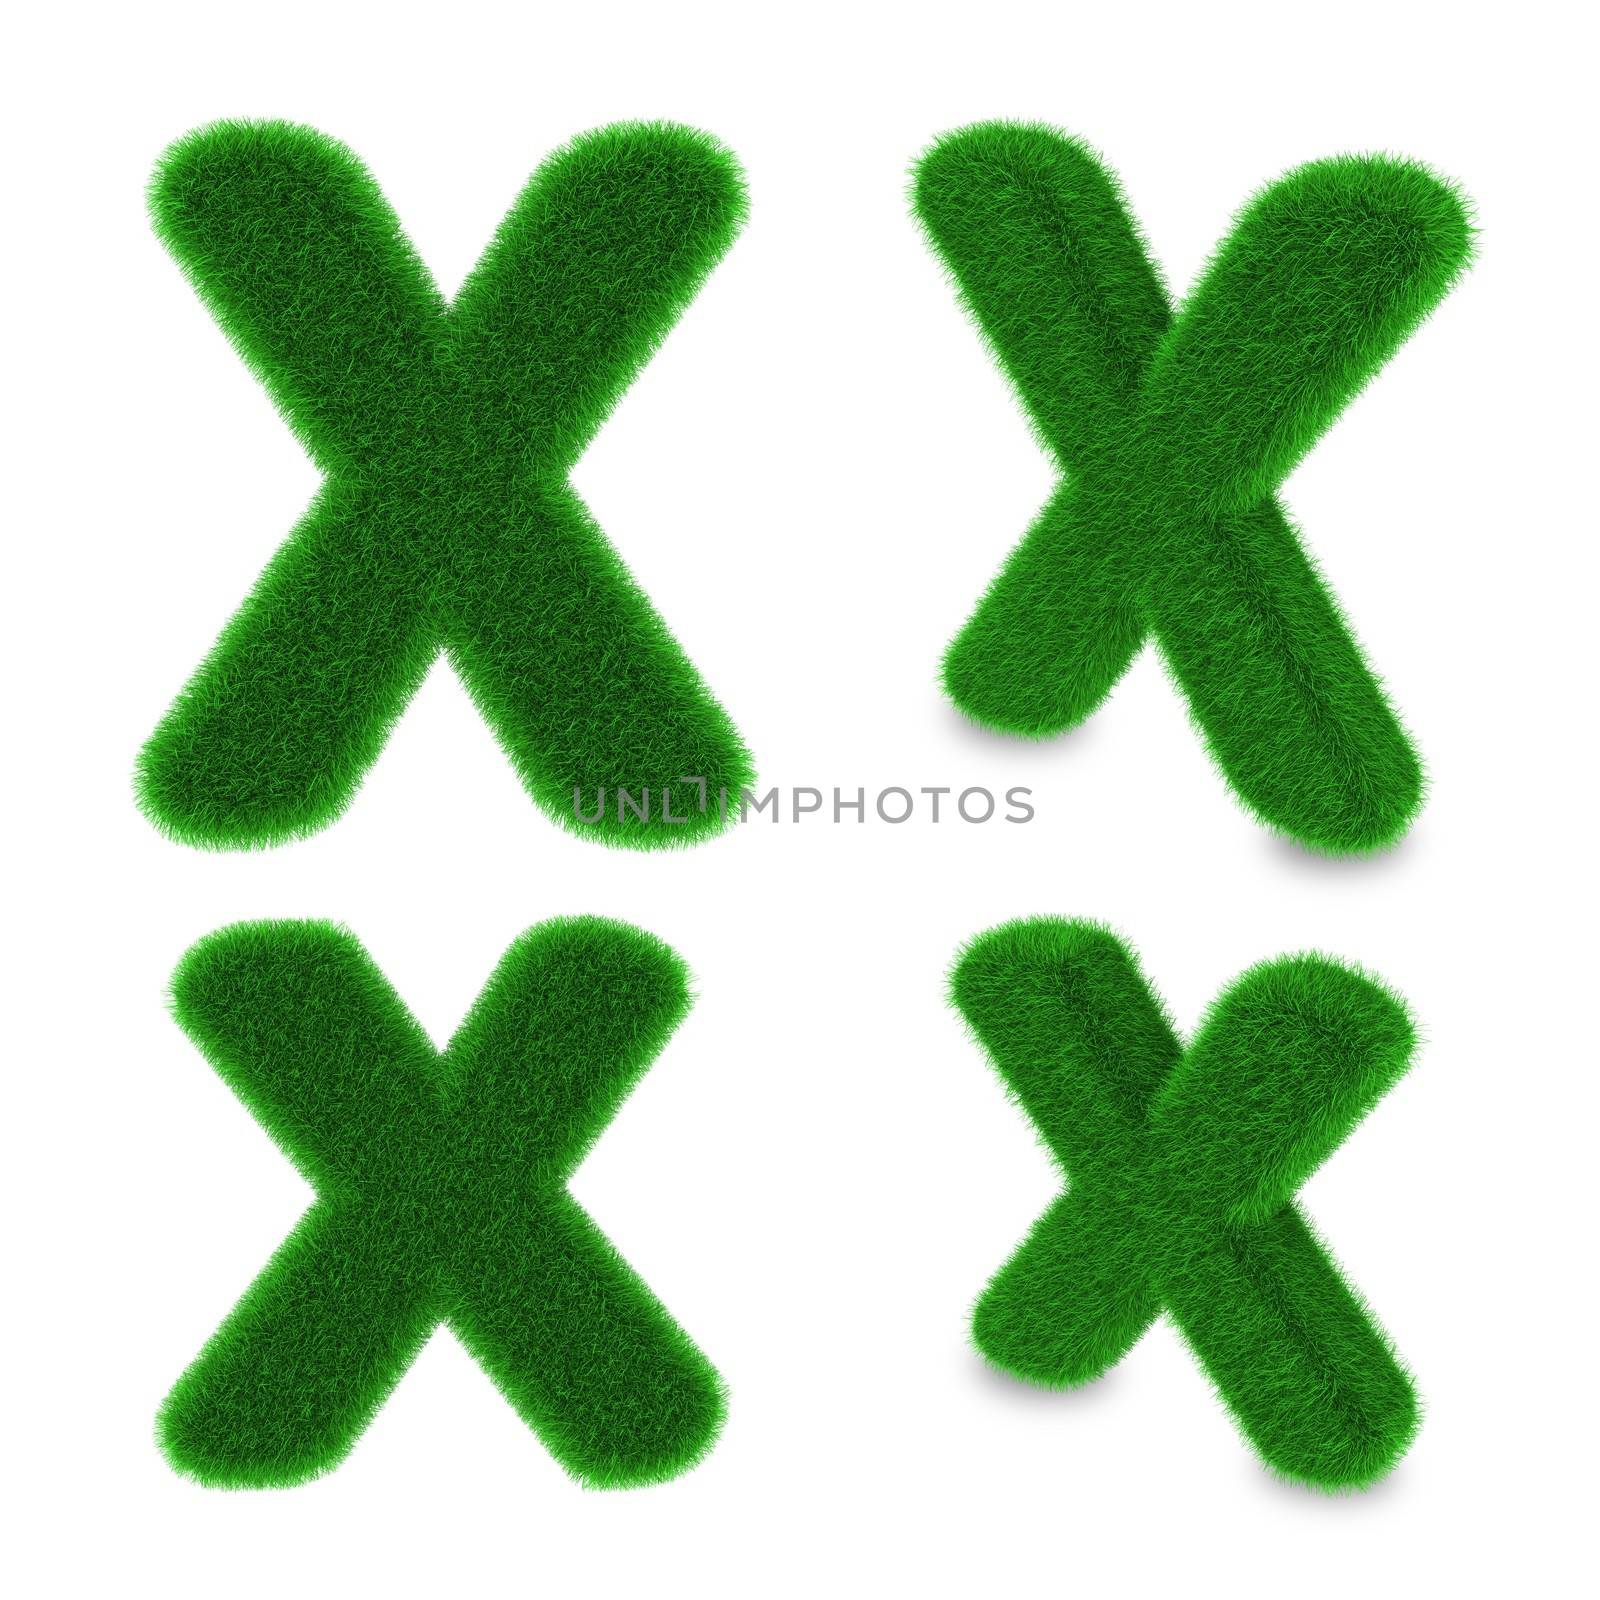 Letter X covered by green grass isolated on white background